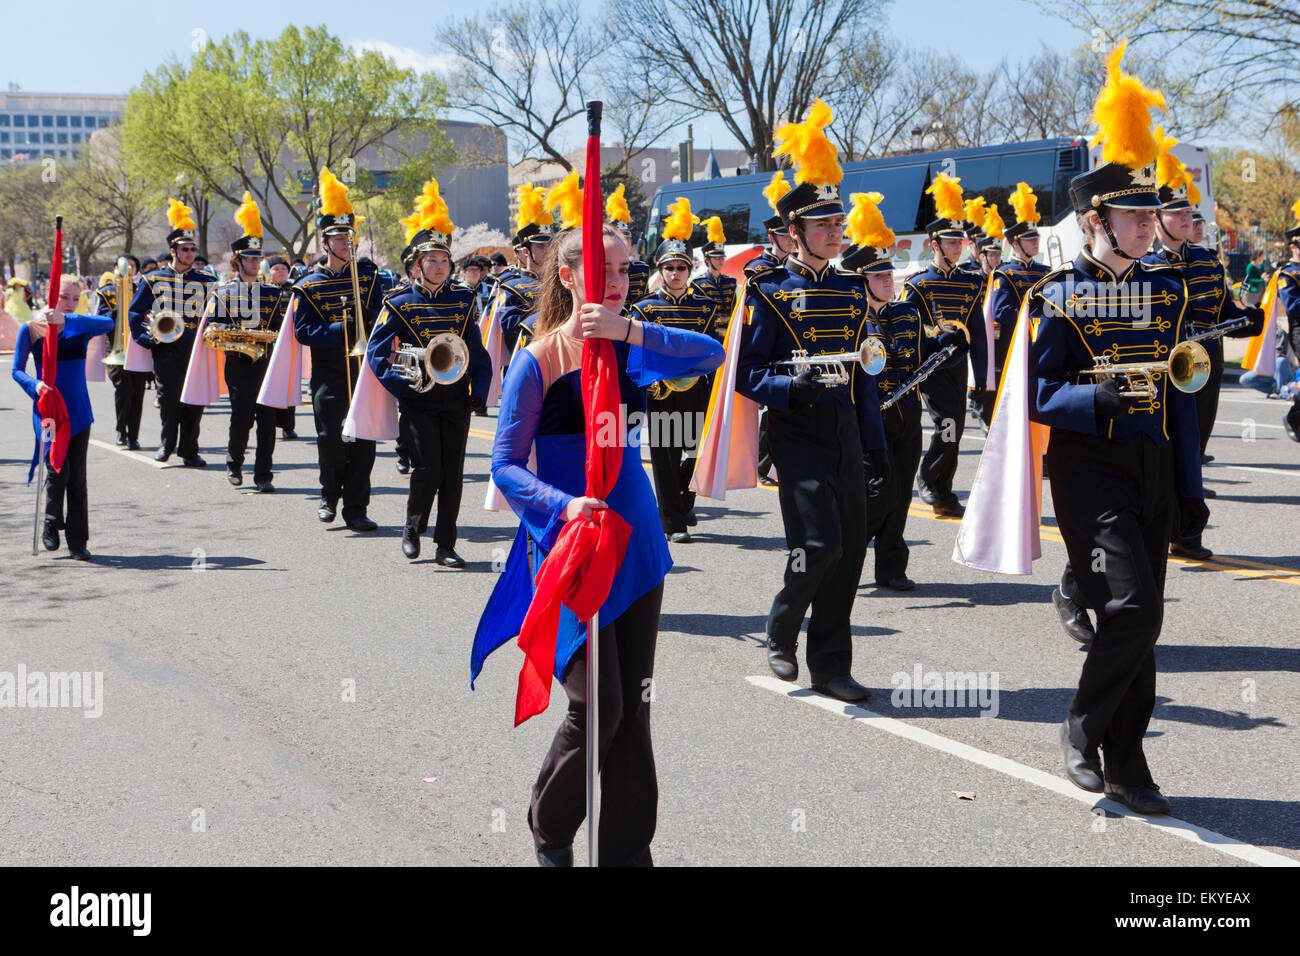 High School marching band at National Cherry Blossom Festival